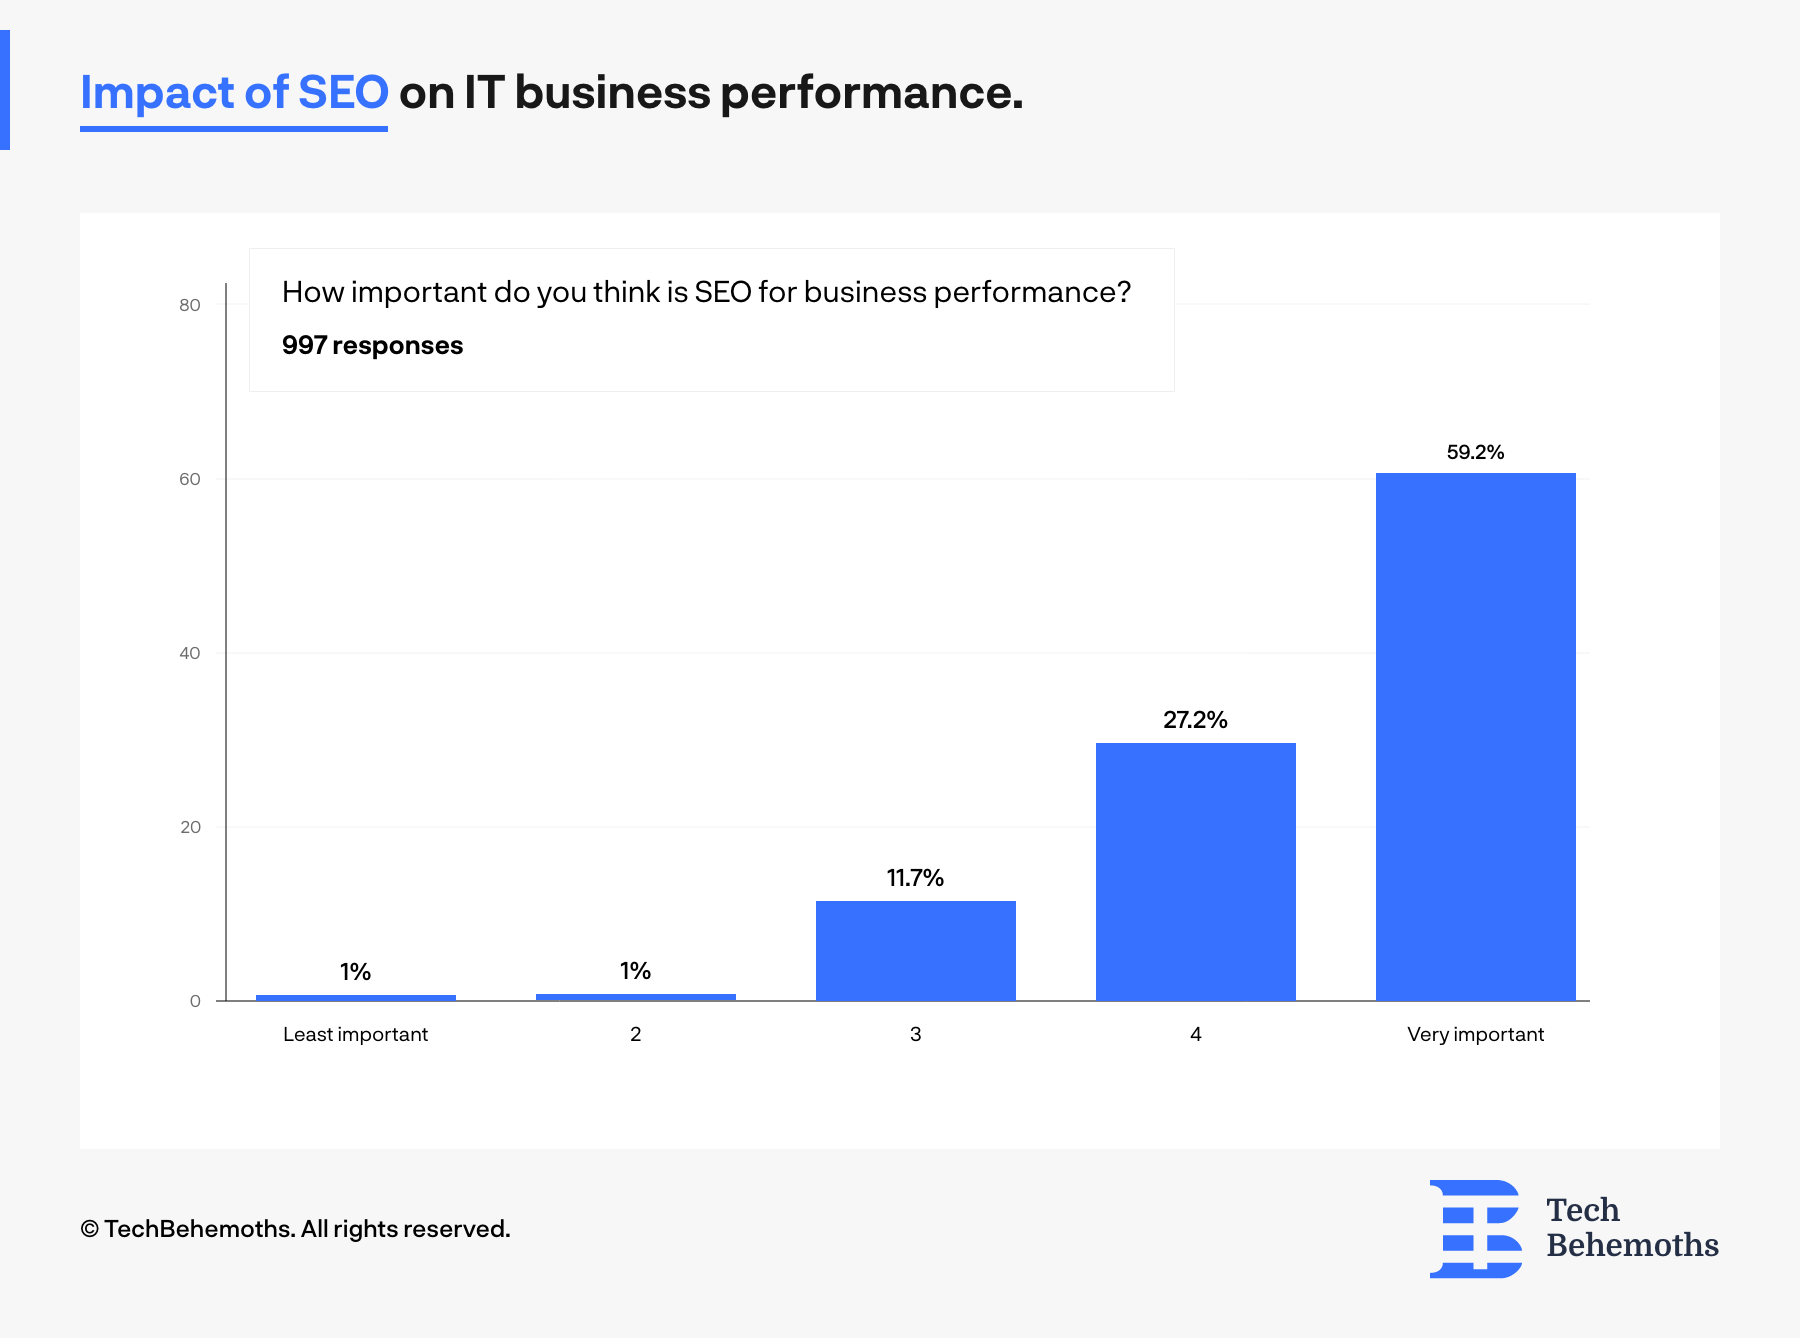 59.2% of IT companies consider that SEO is very important for their business performance